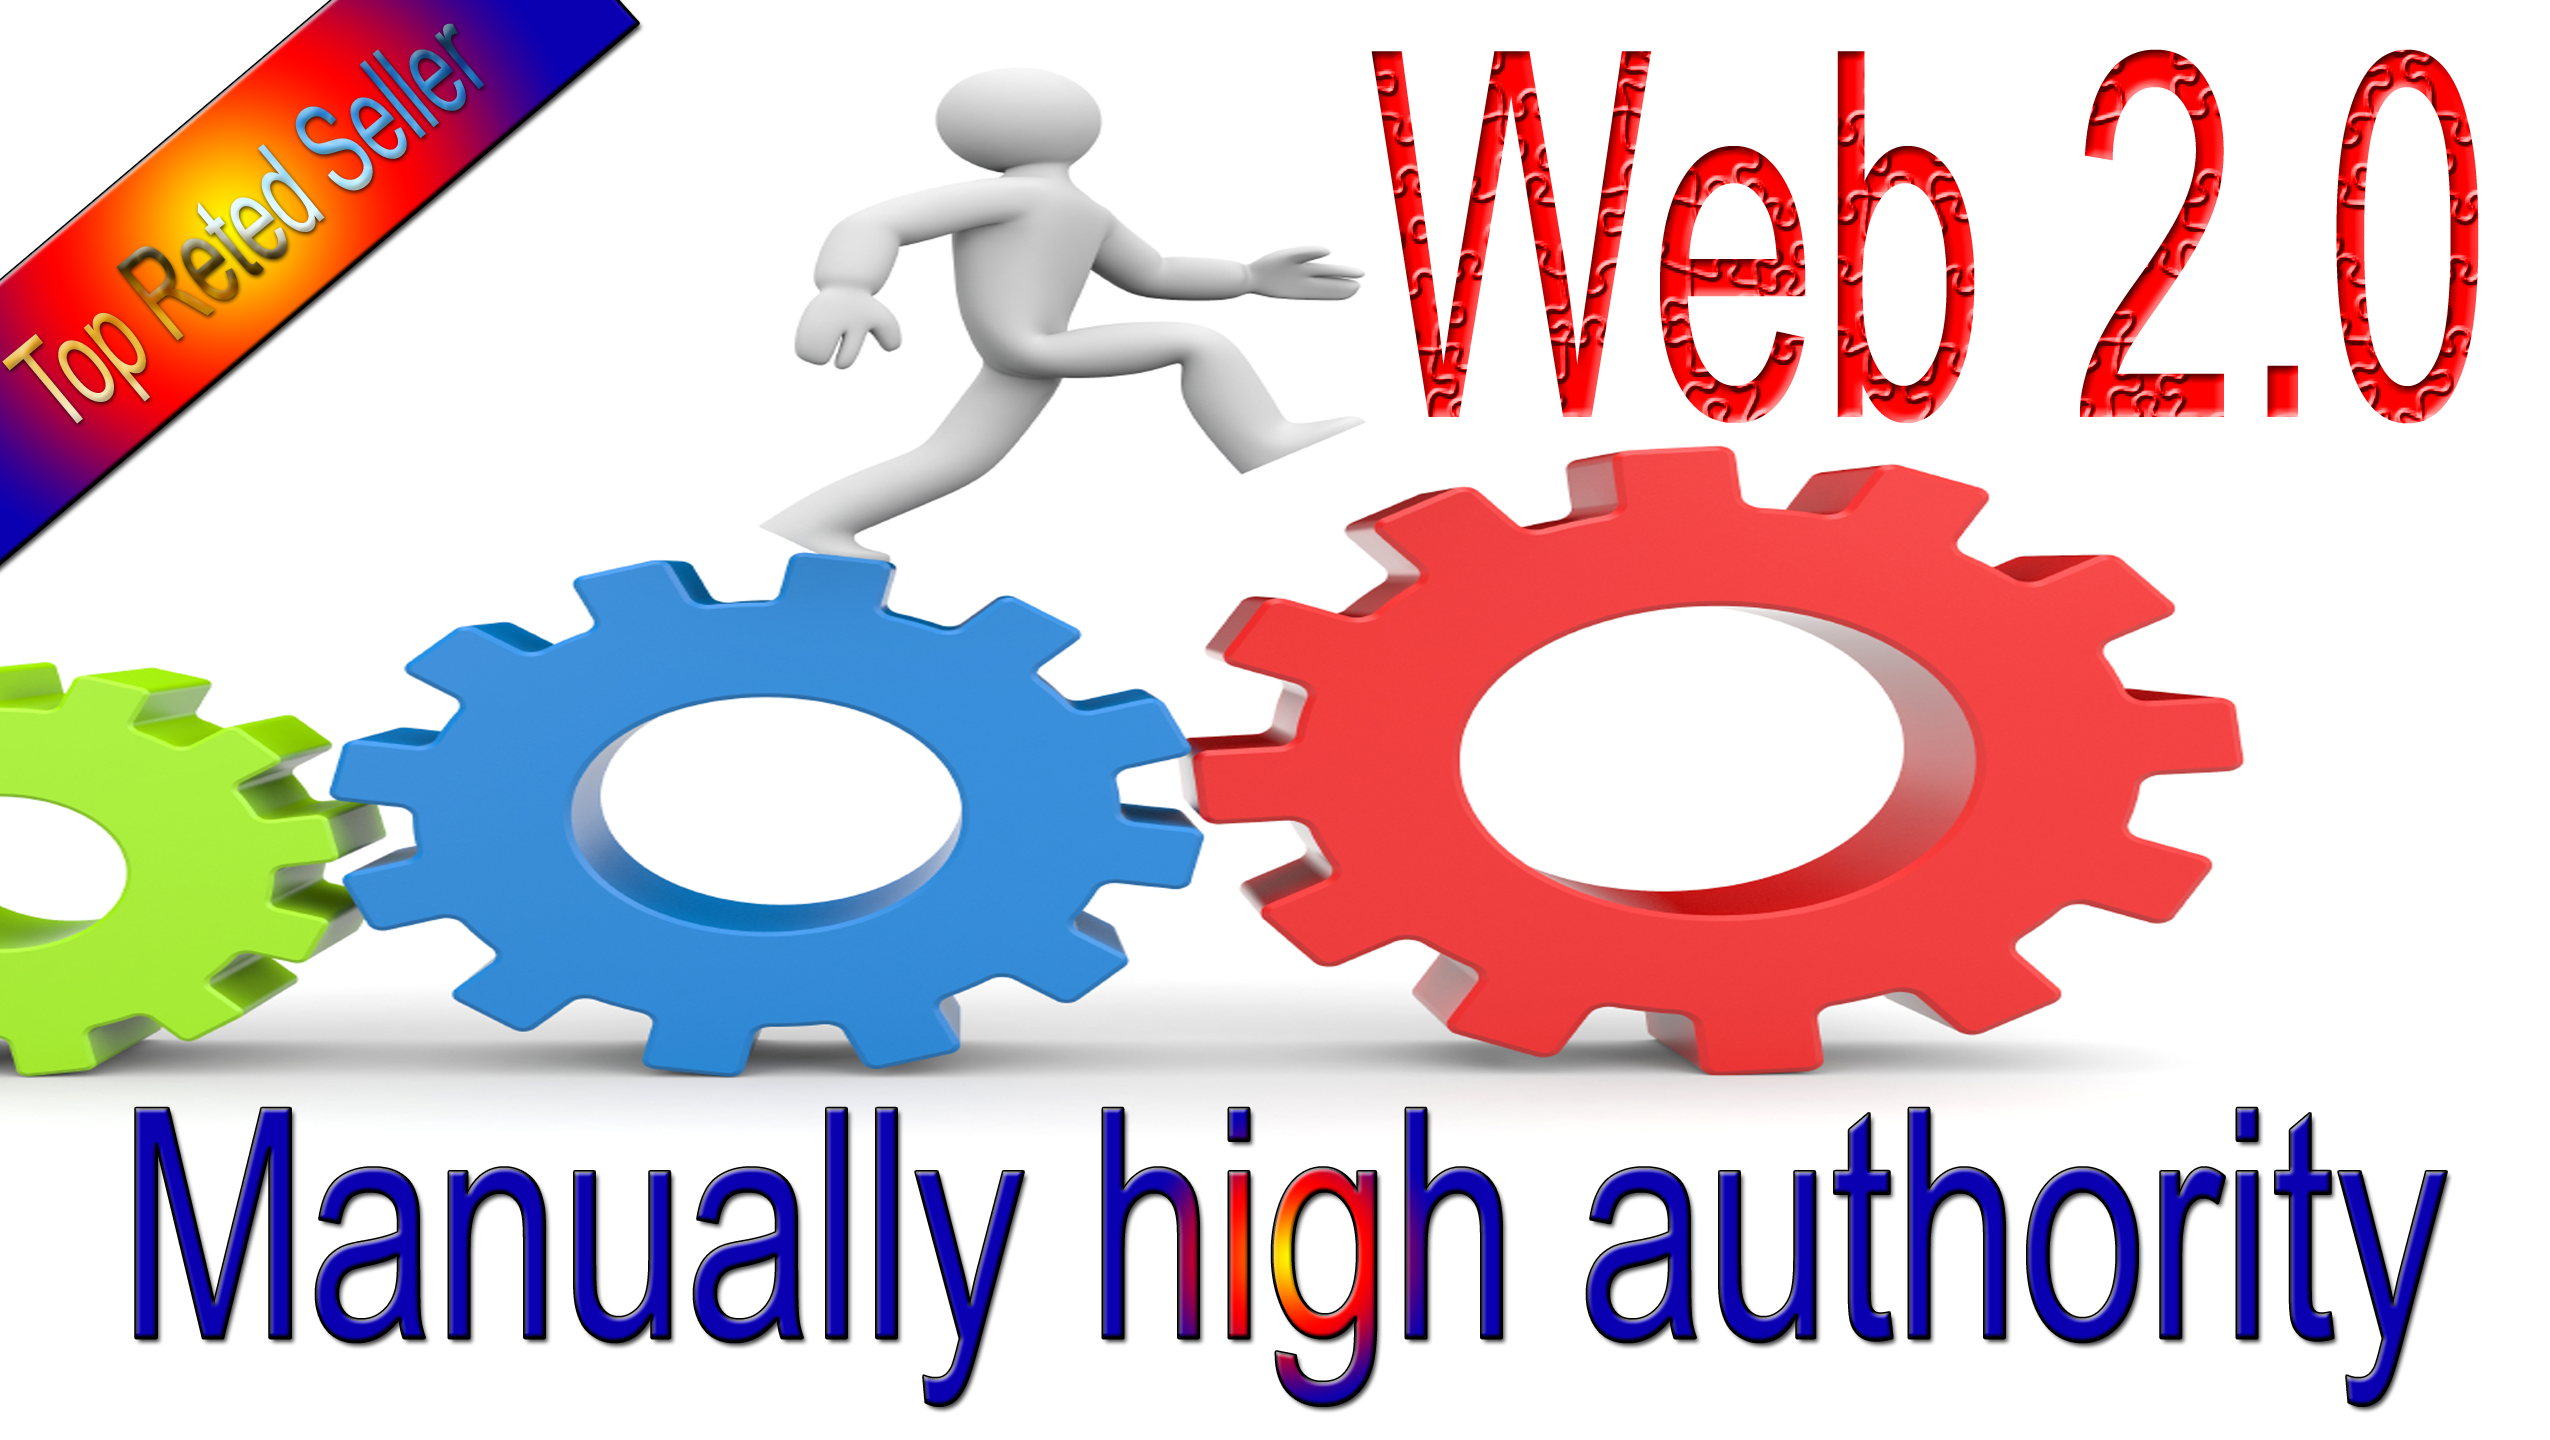 Get rank with 10 manually high authority web 2.0 backlinks